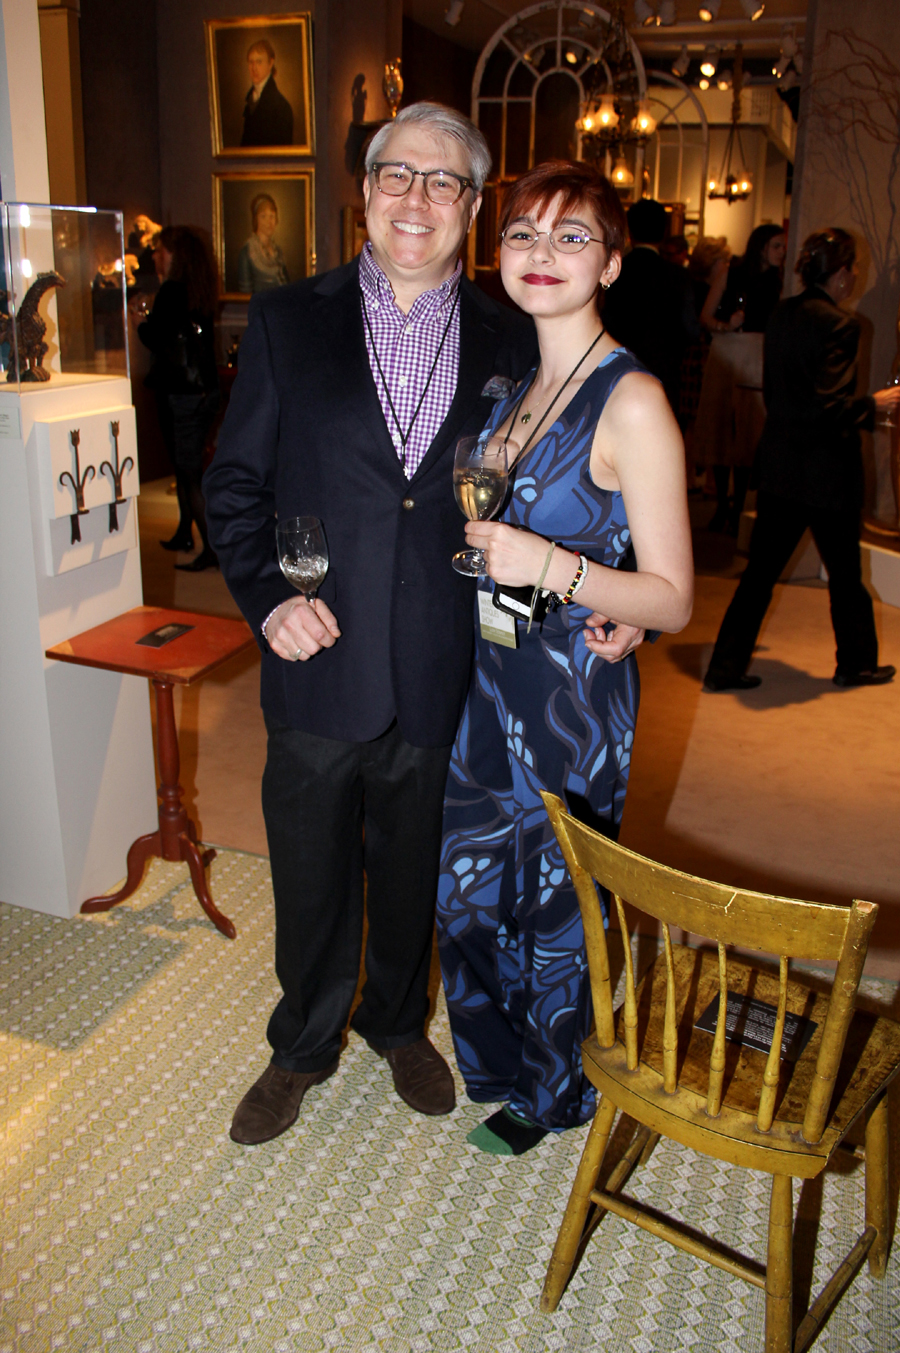 David Schorsch was joined by his daughter, Zizi, on opening night.